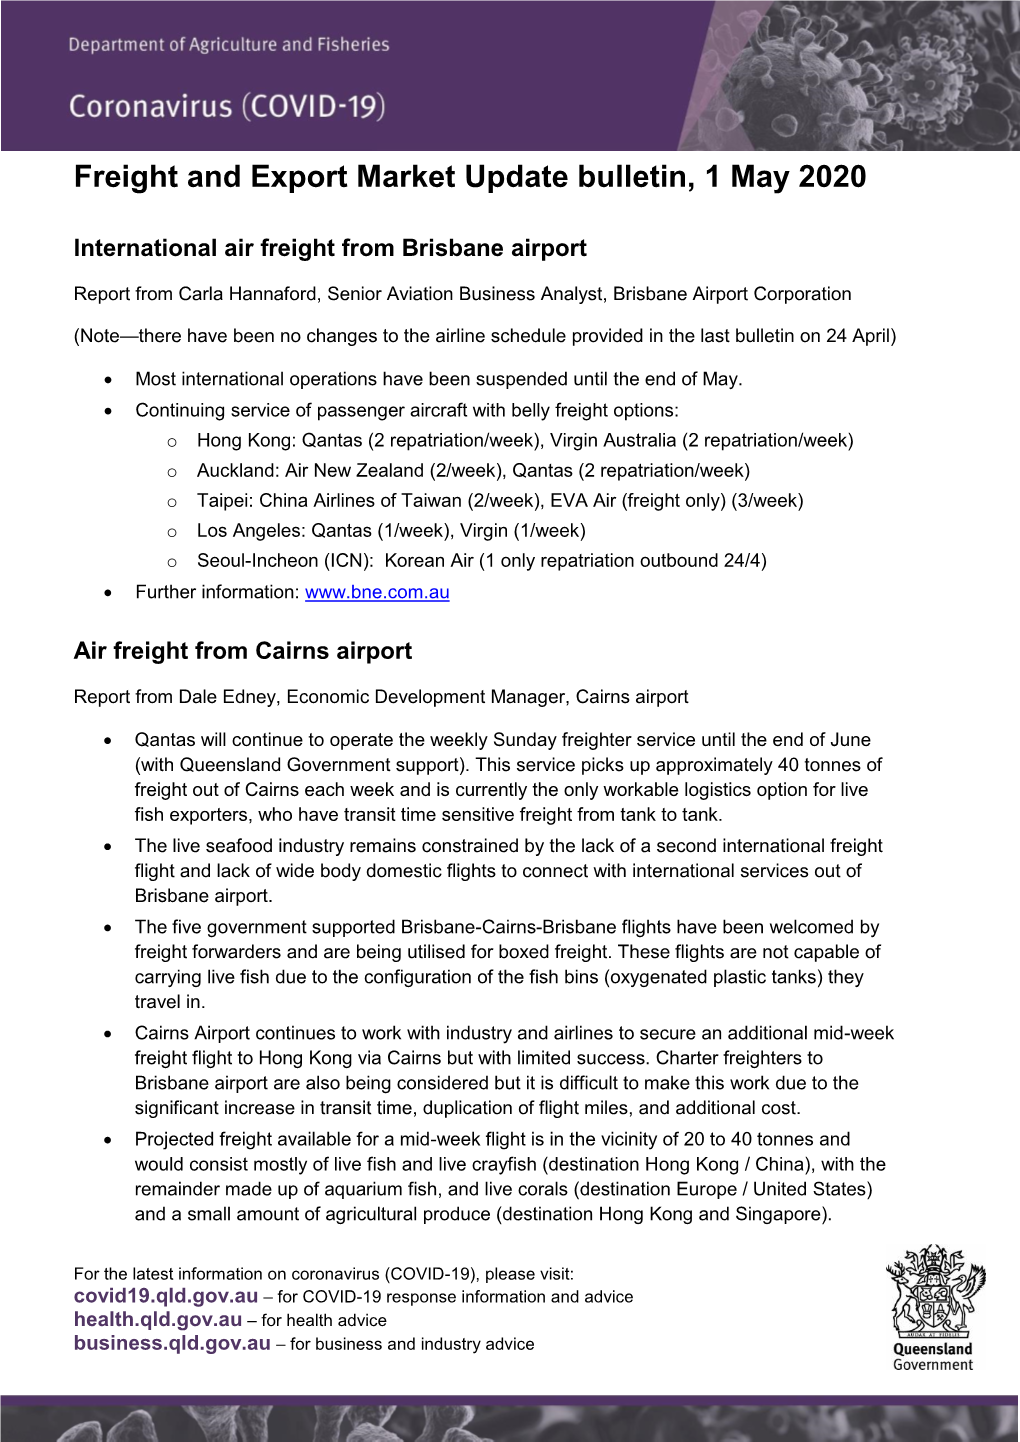 Freight and Export Market Update Bulletin, 1 May 2020